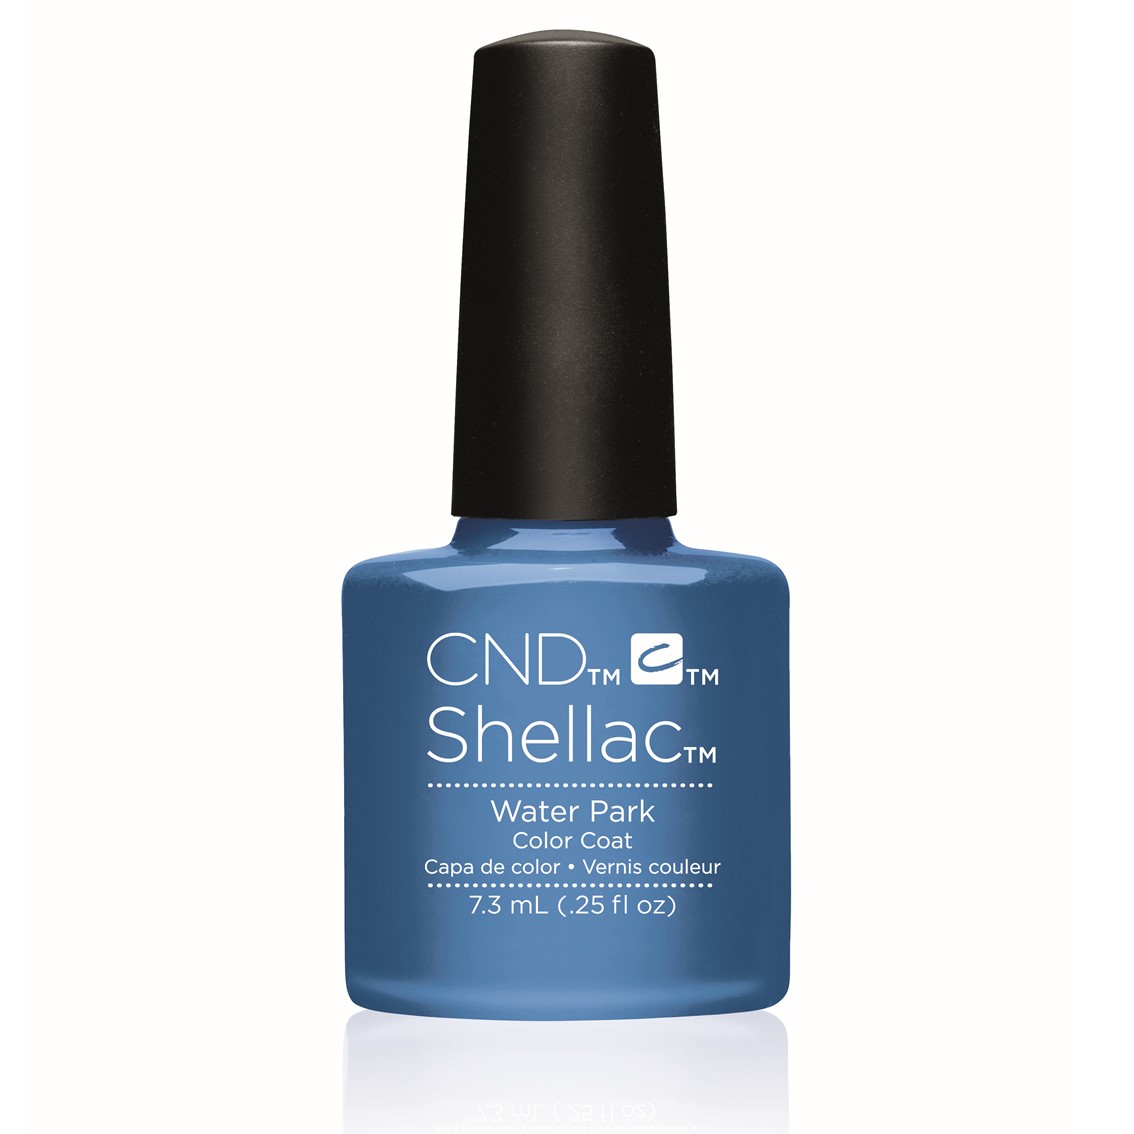 CND™ SHELLAC™ Water Park